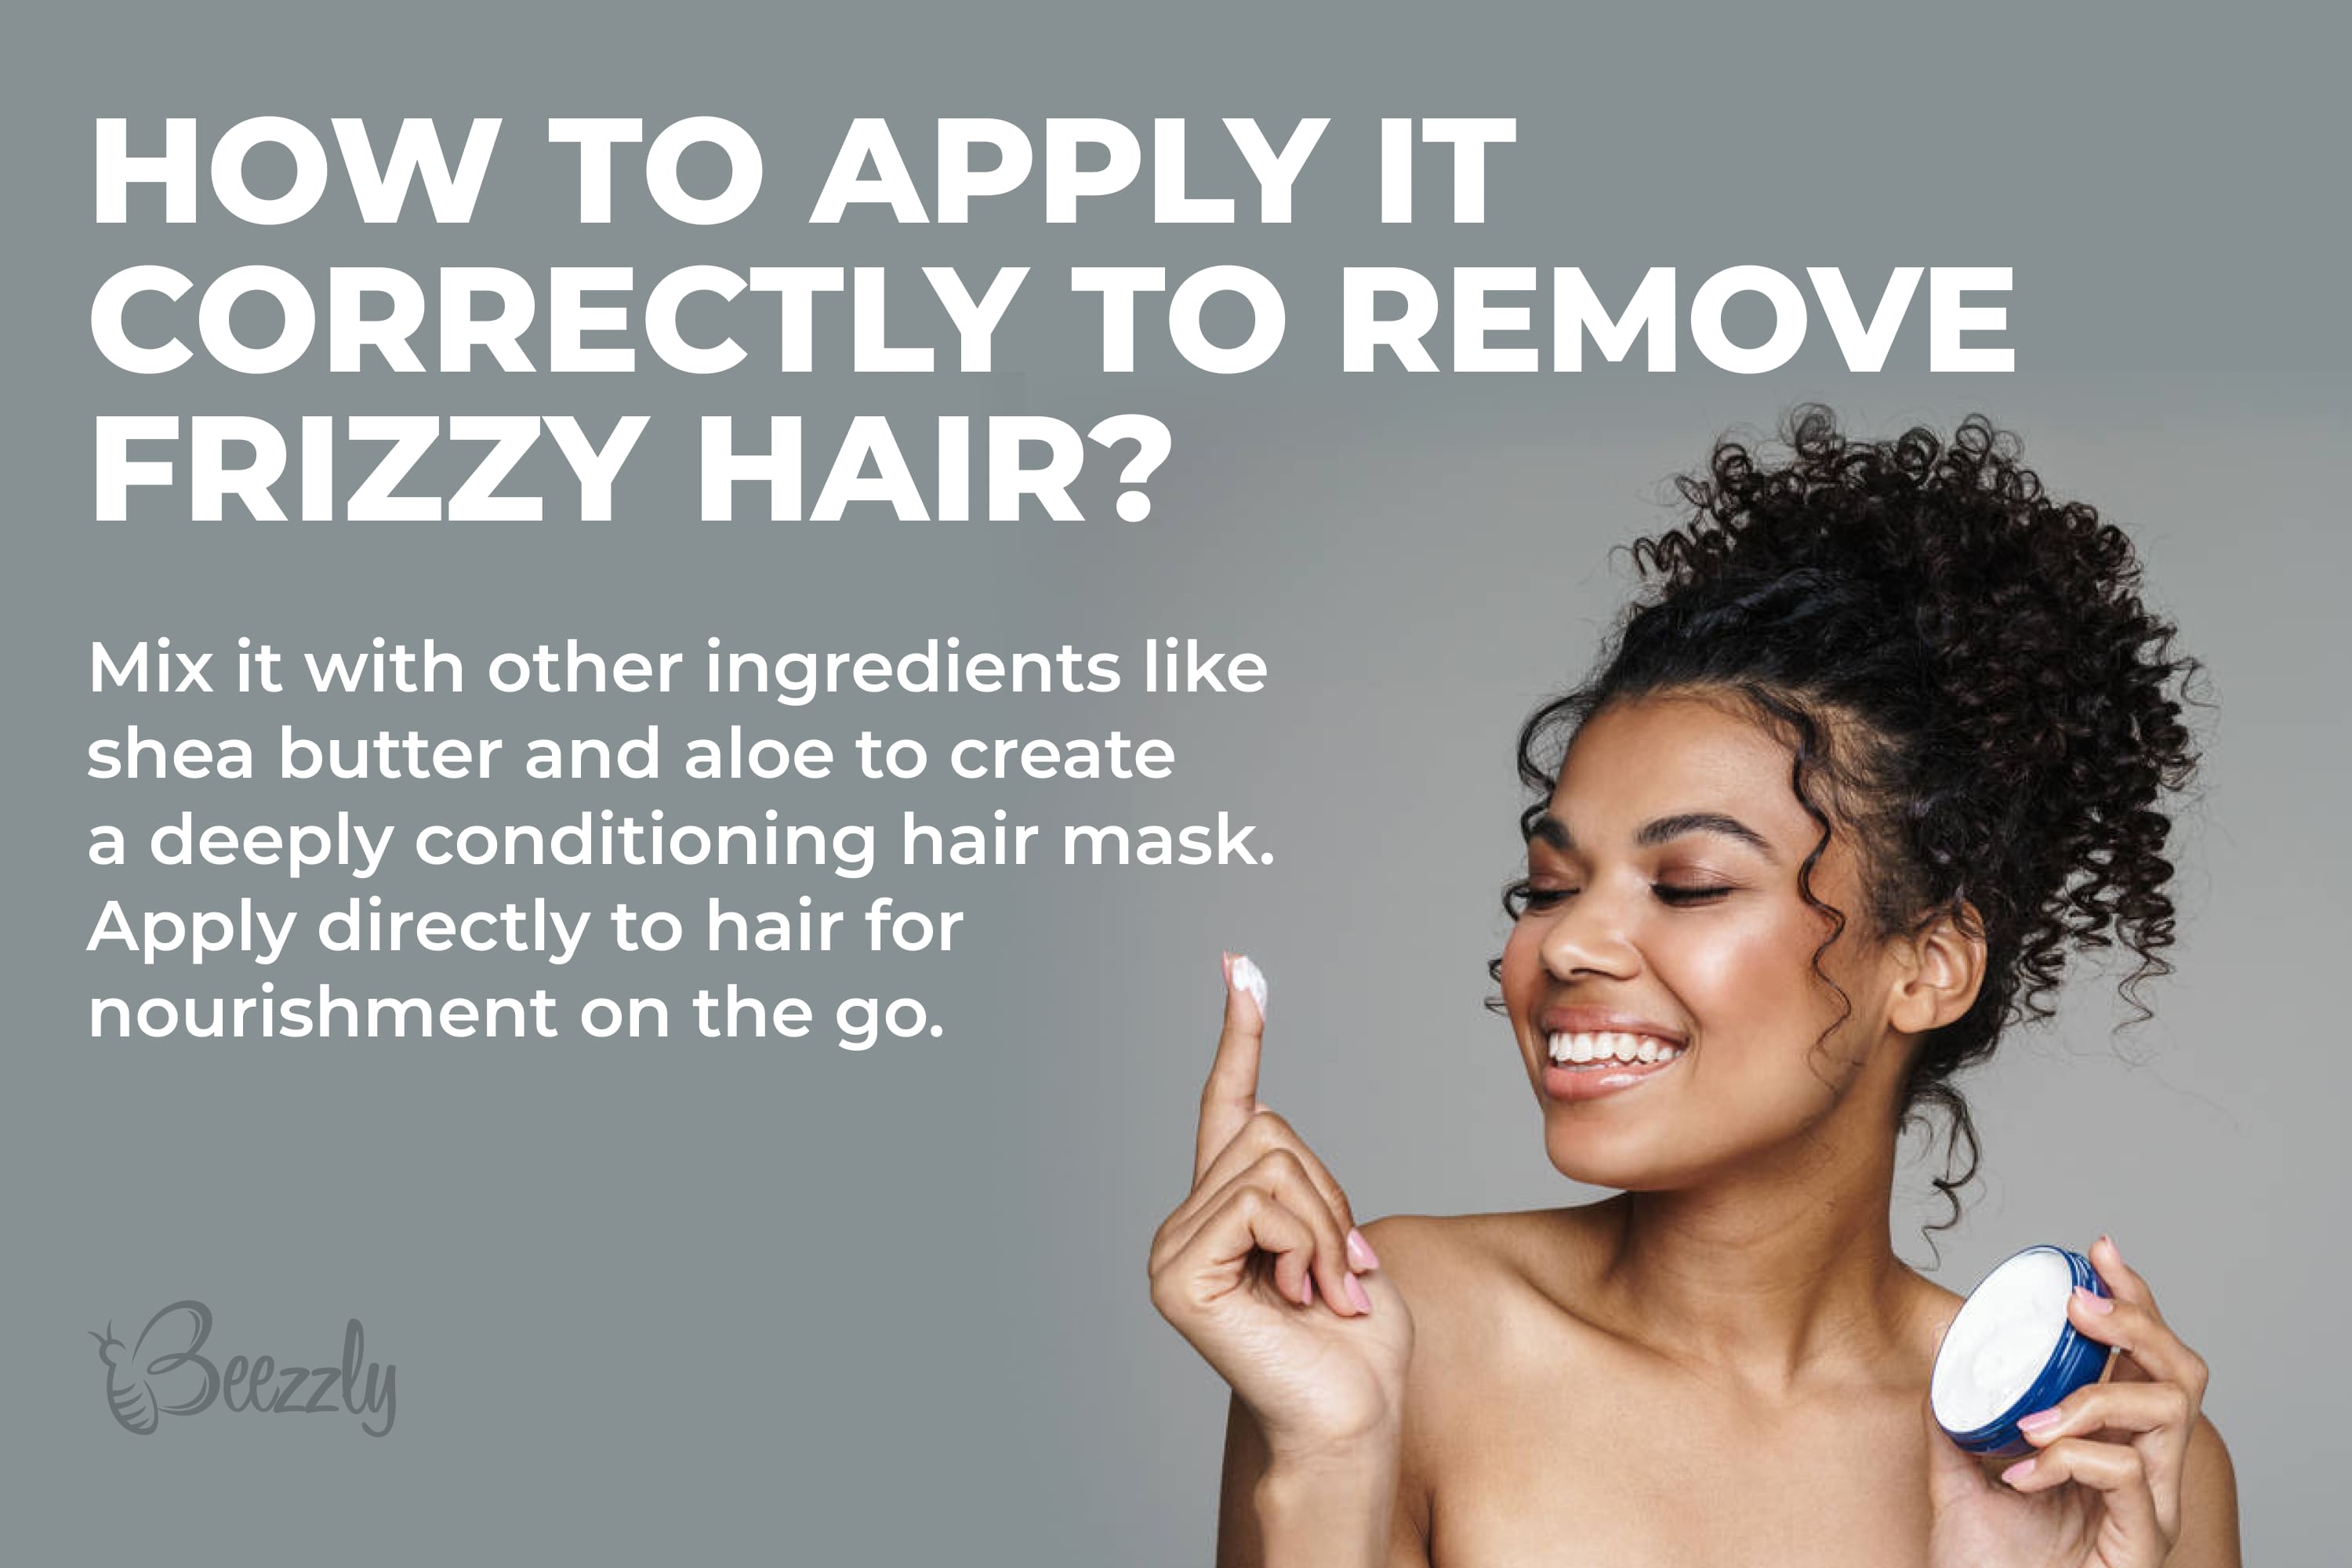 How to apply it correctly to remove frizzy hair